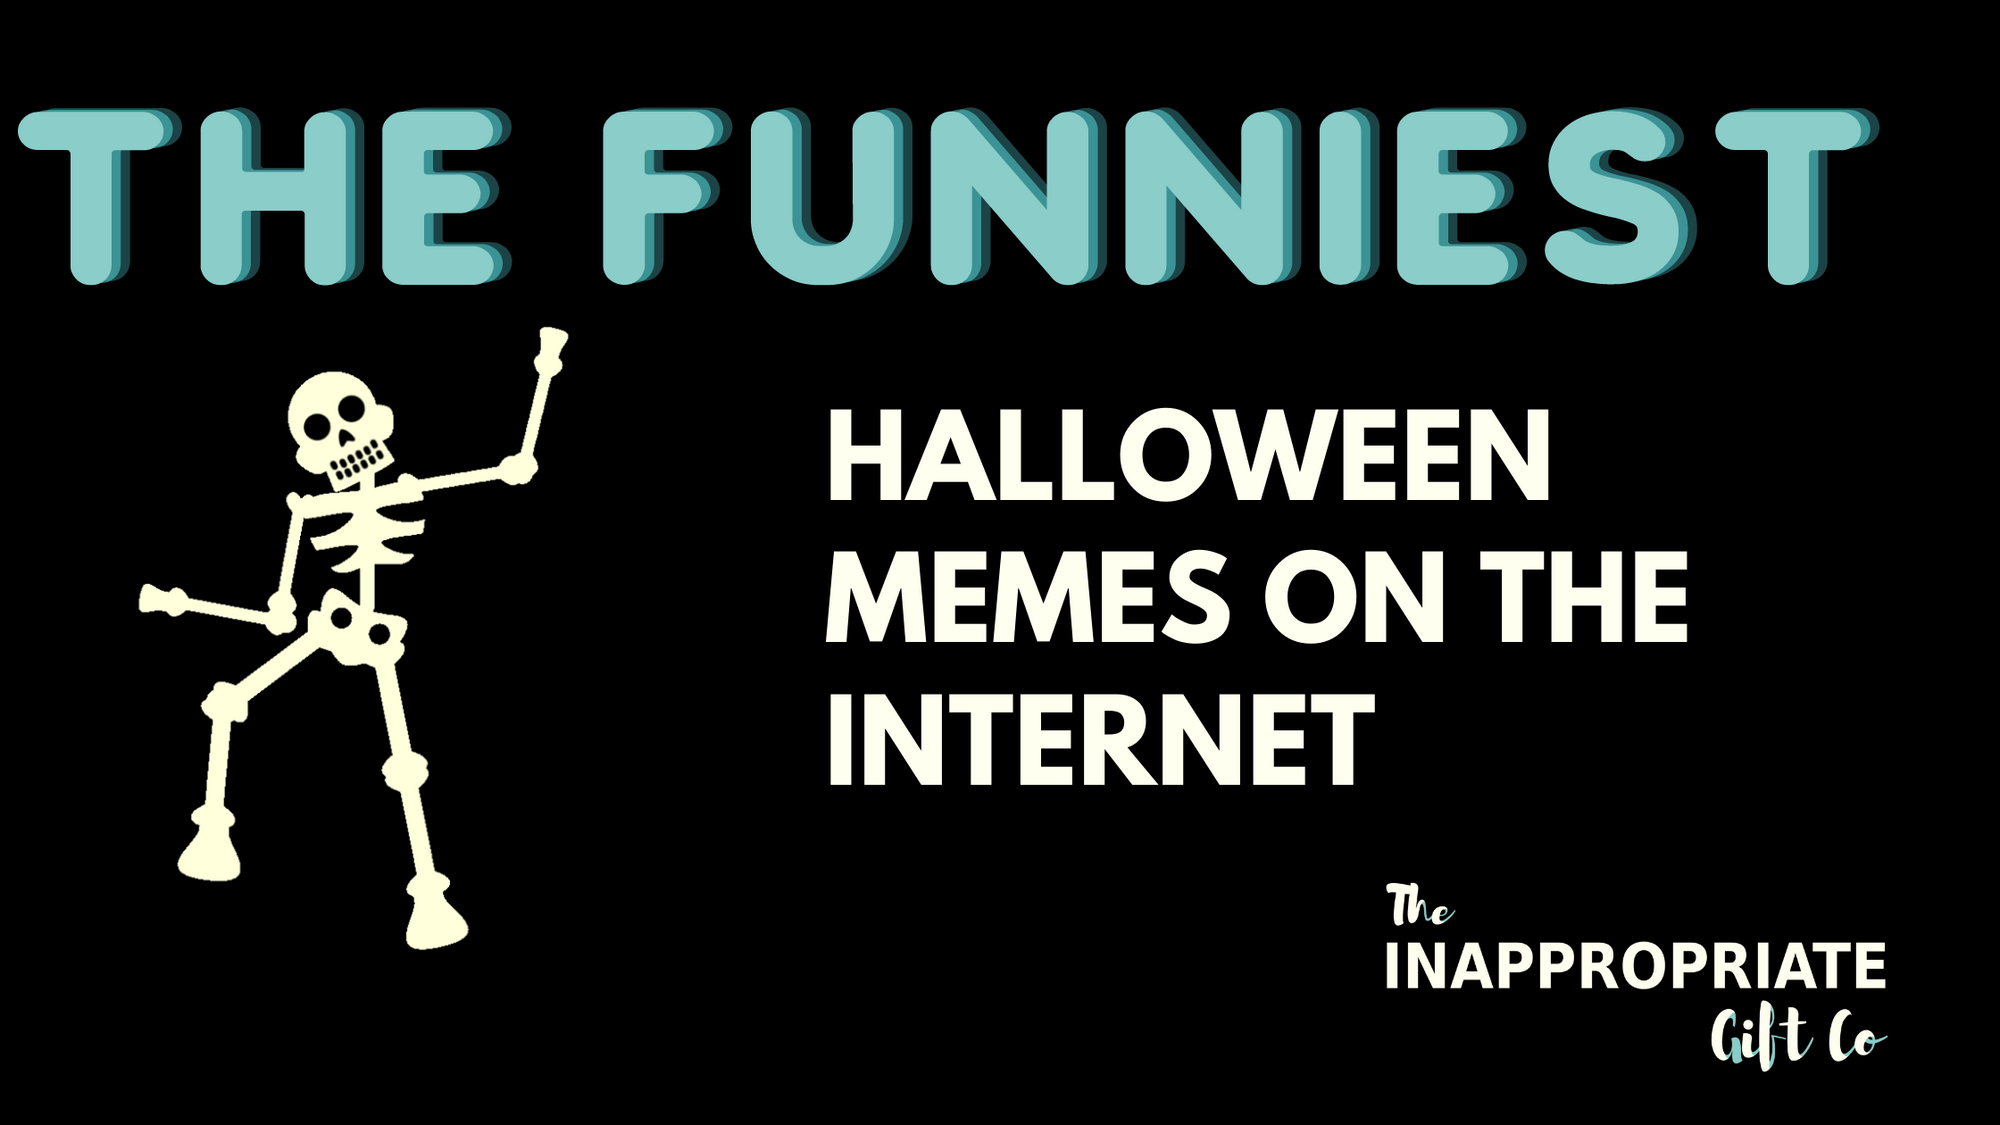 Our Favourite 30 Inappropriate Halloween Memes